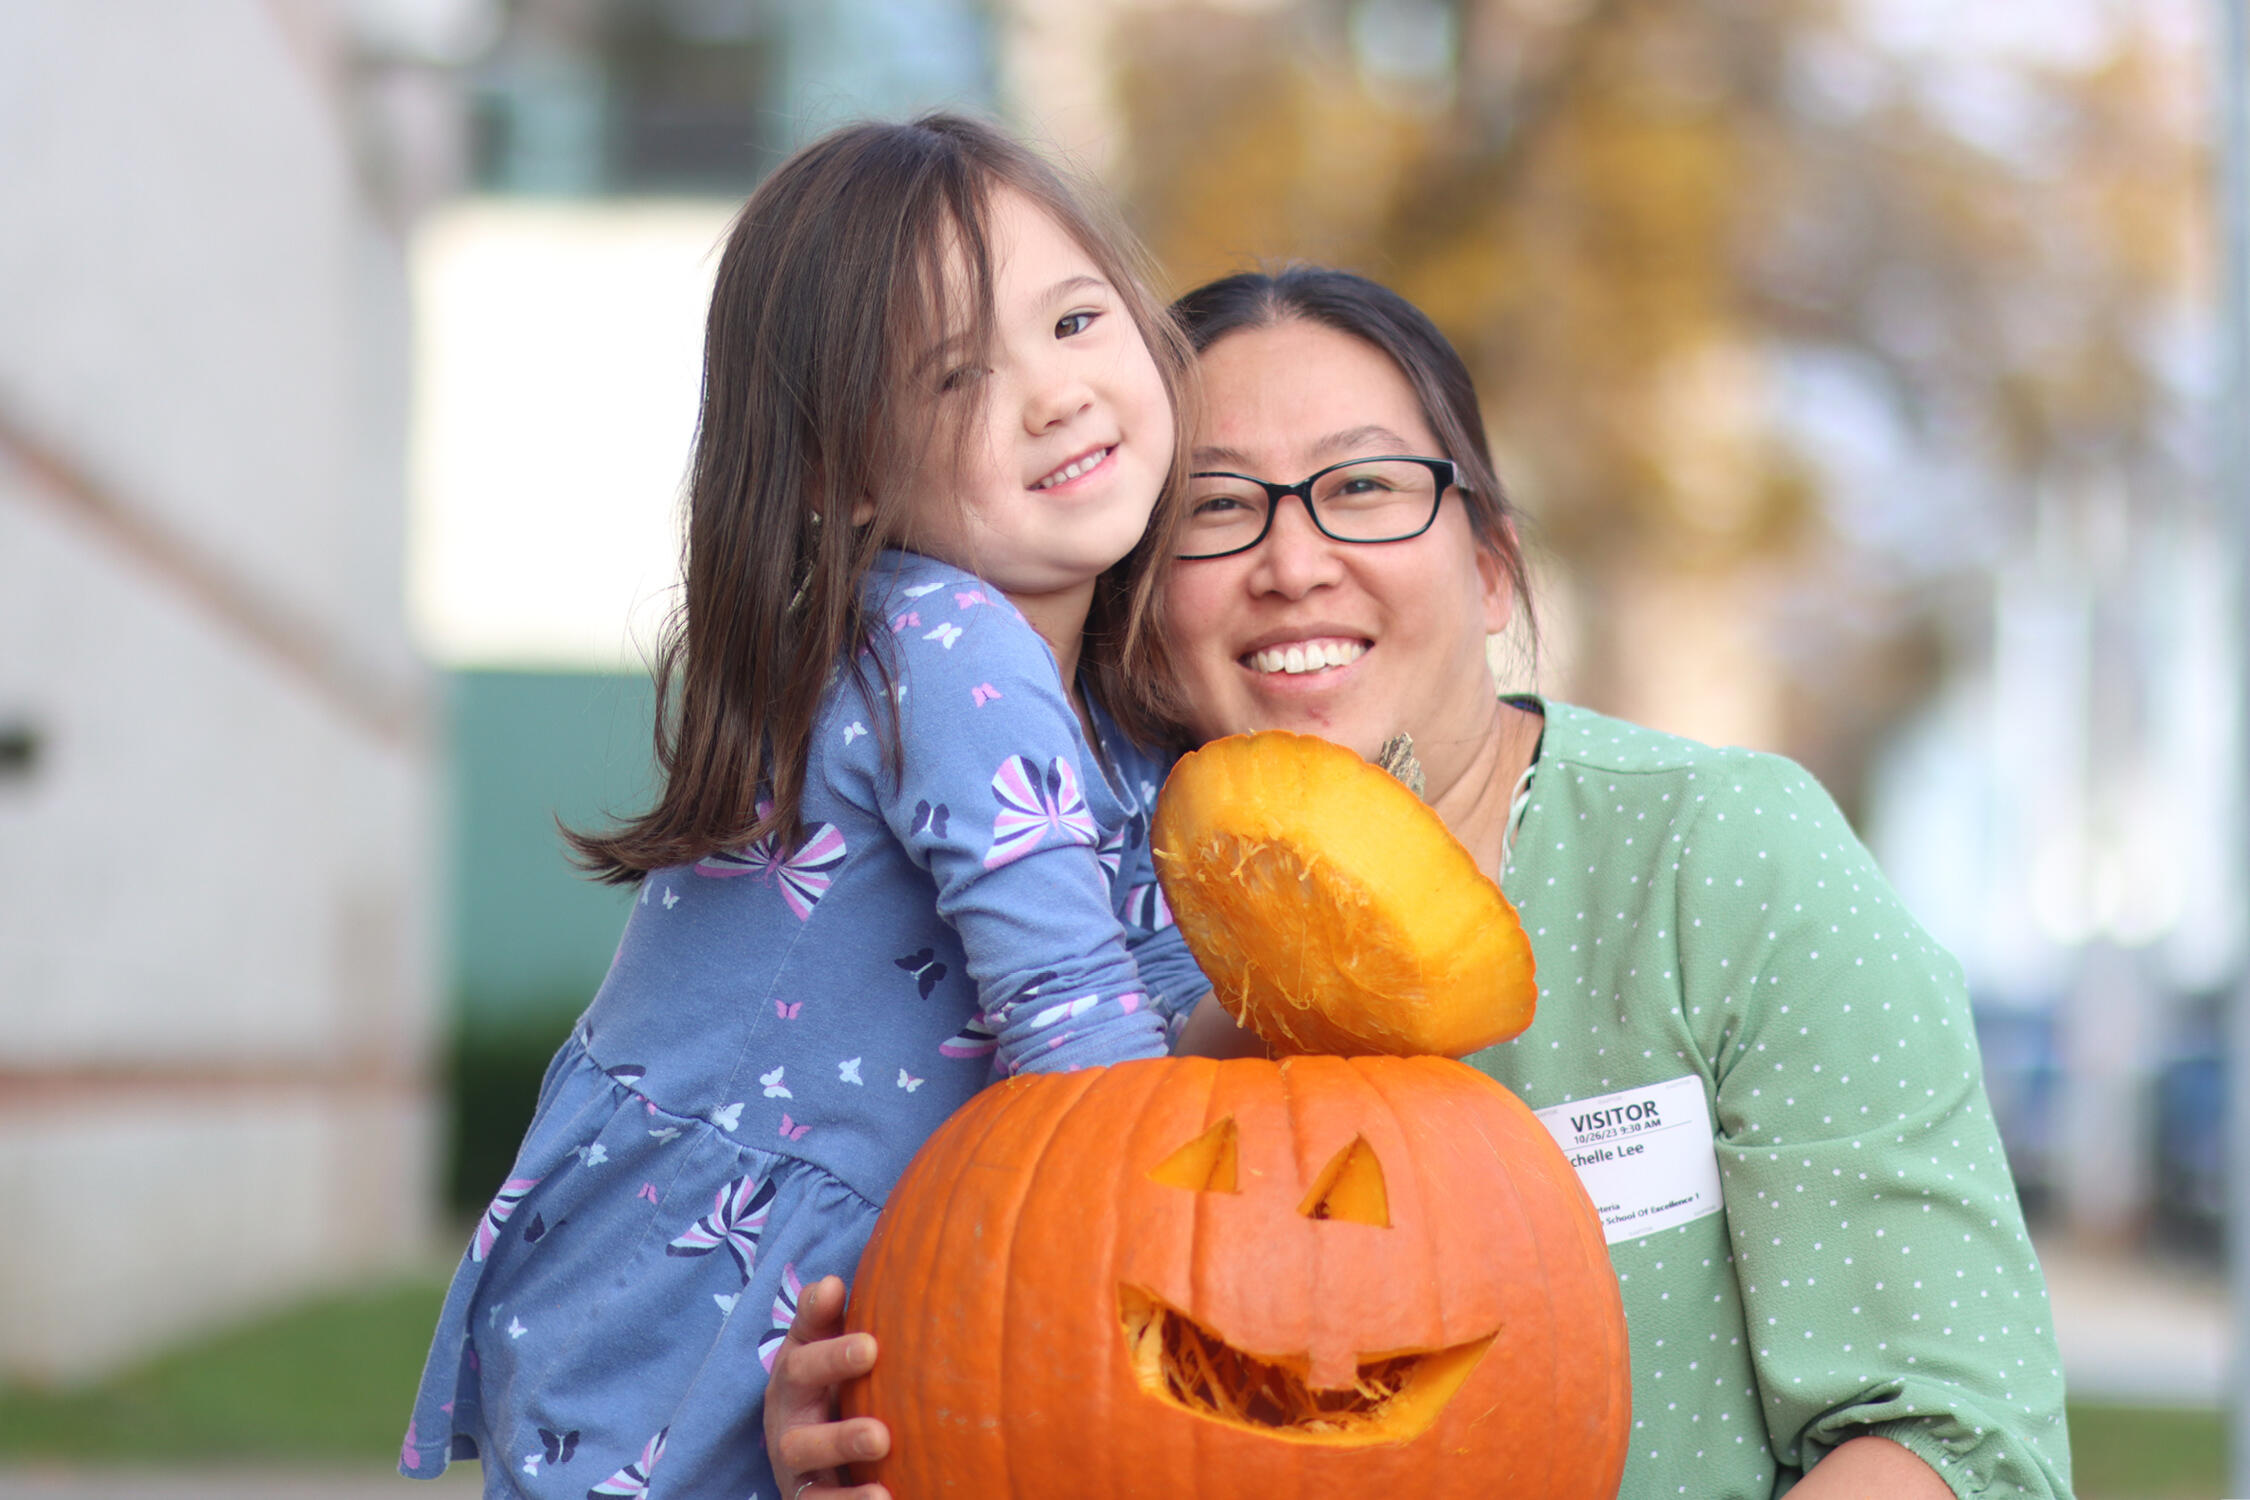 Student and their mother posing for a picture with the pumpkin they carved